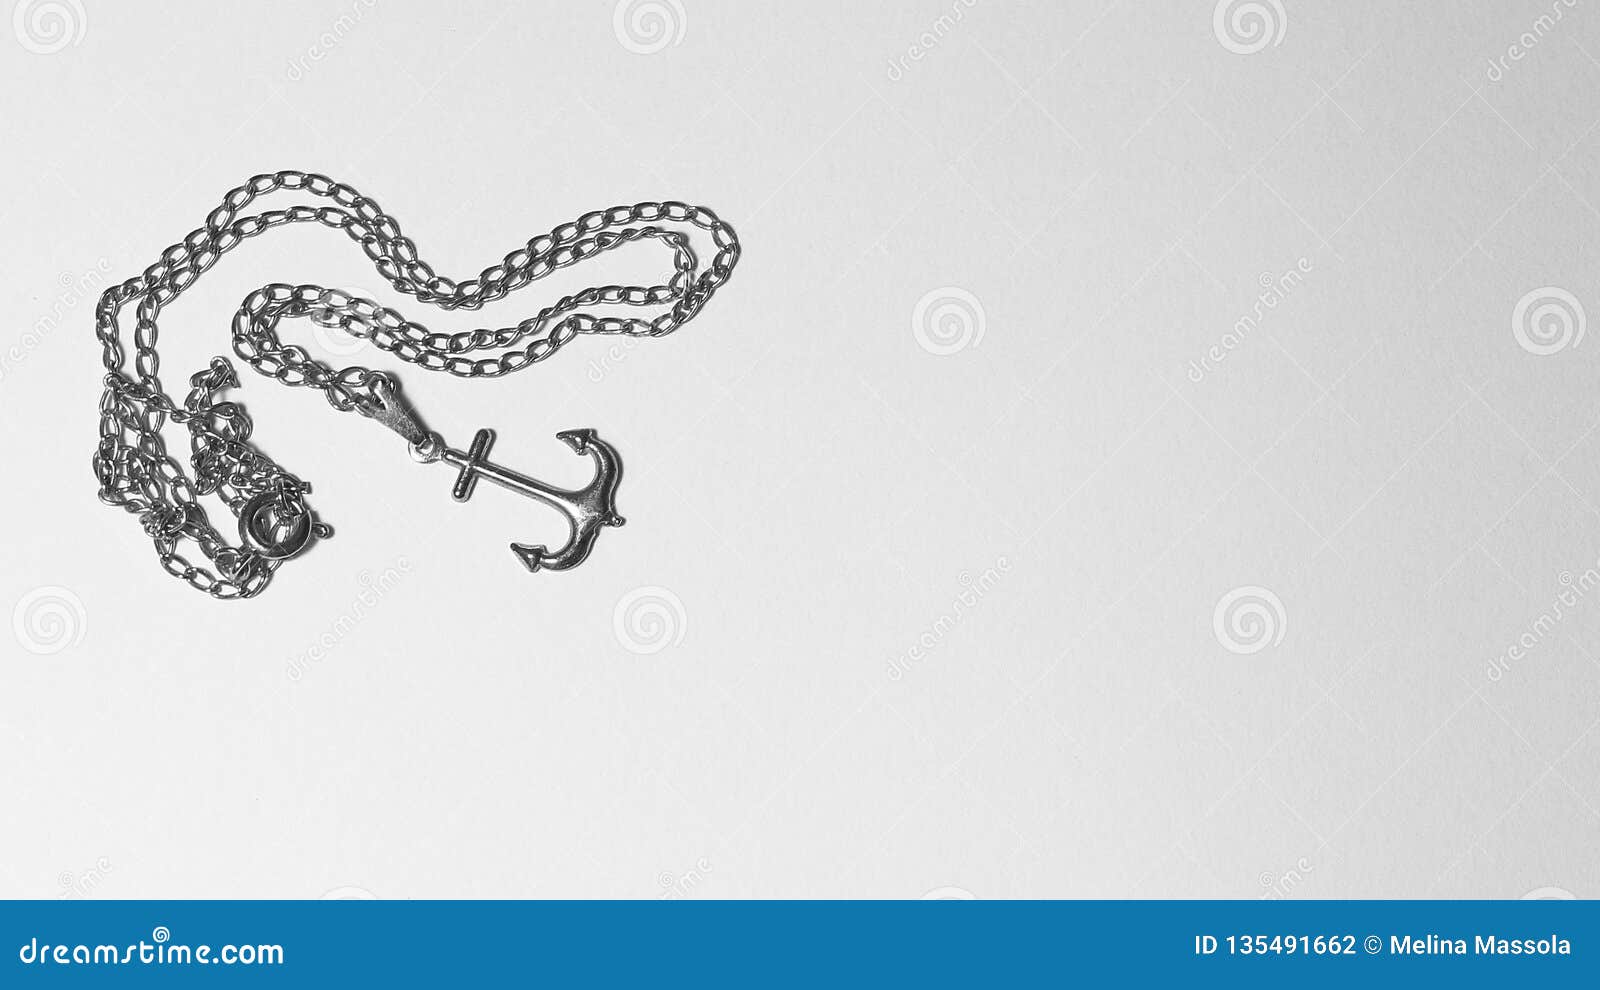 anchor necklace pendant in black and white picture